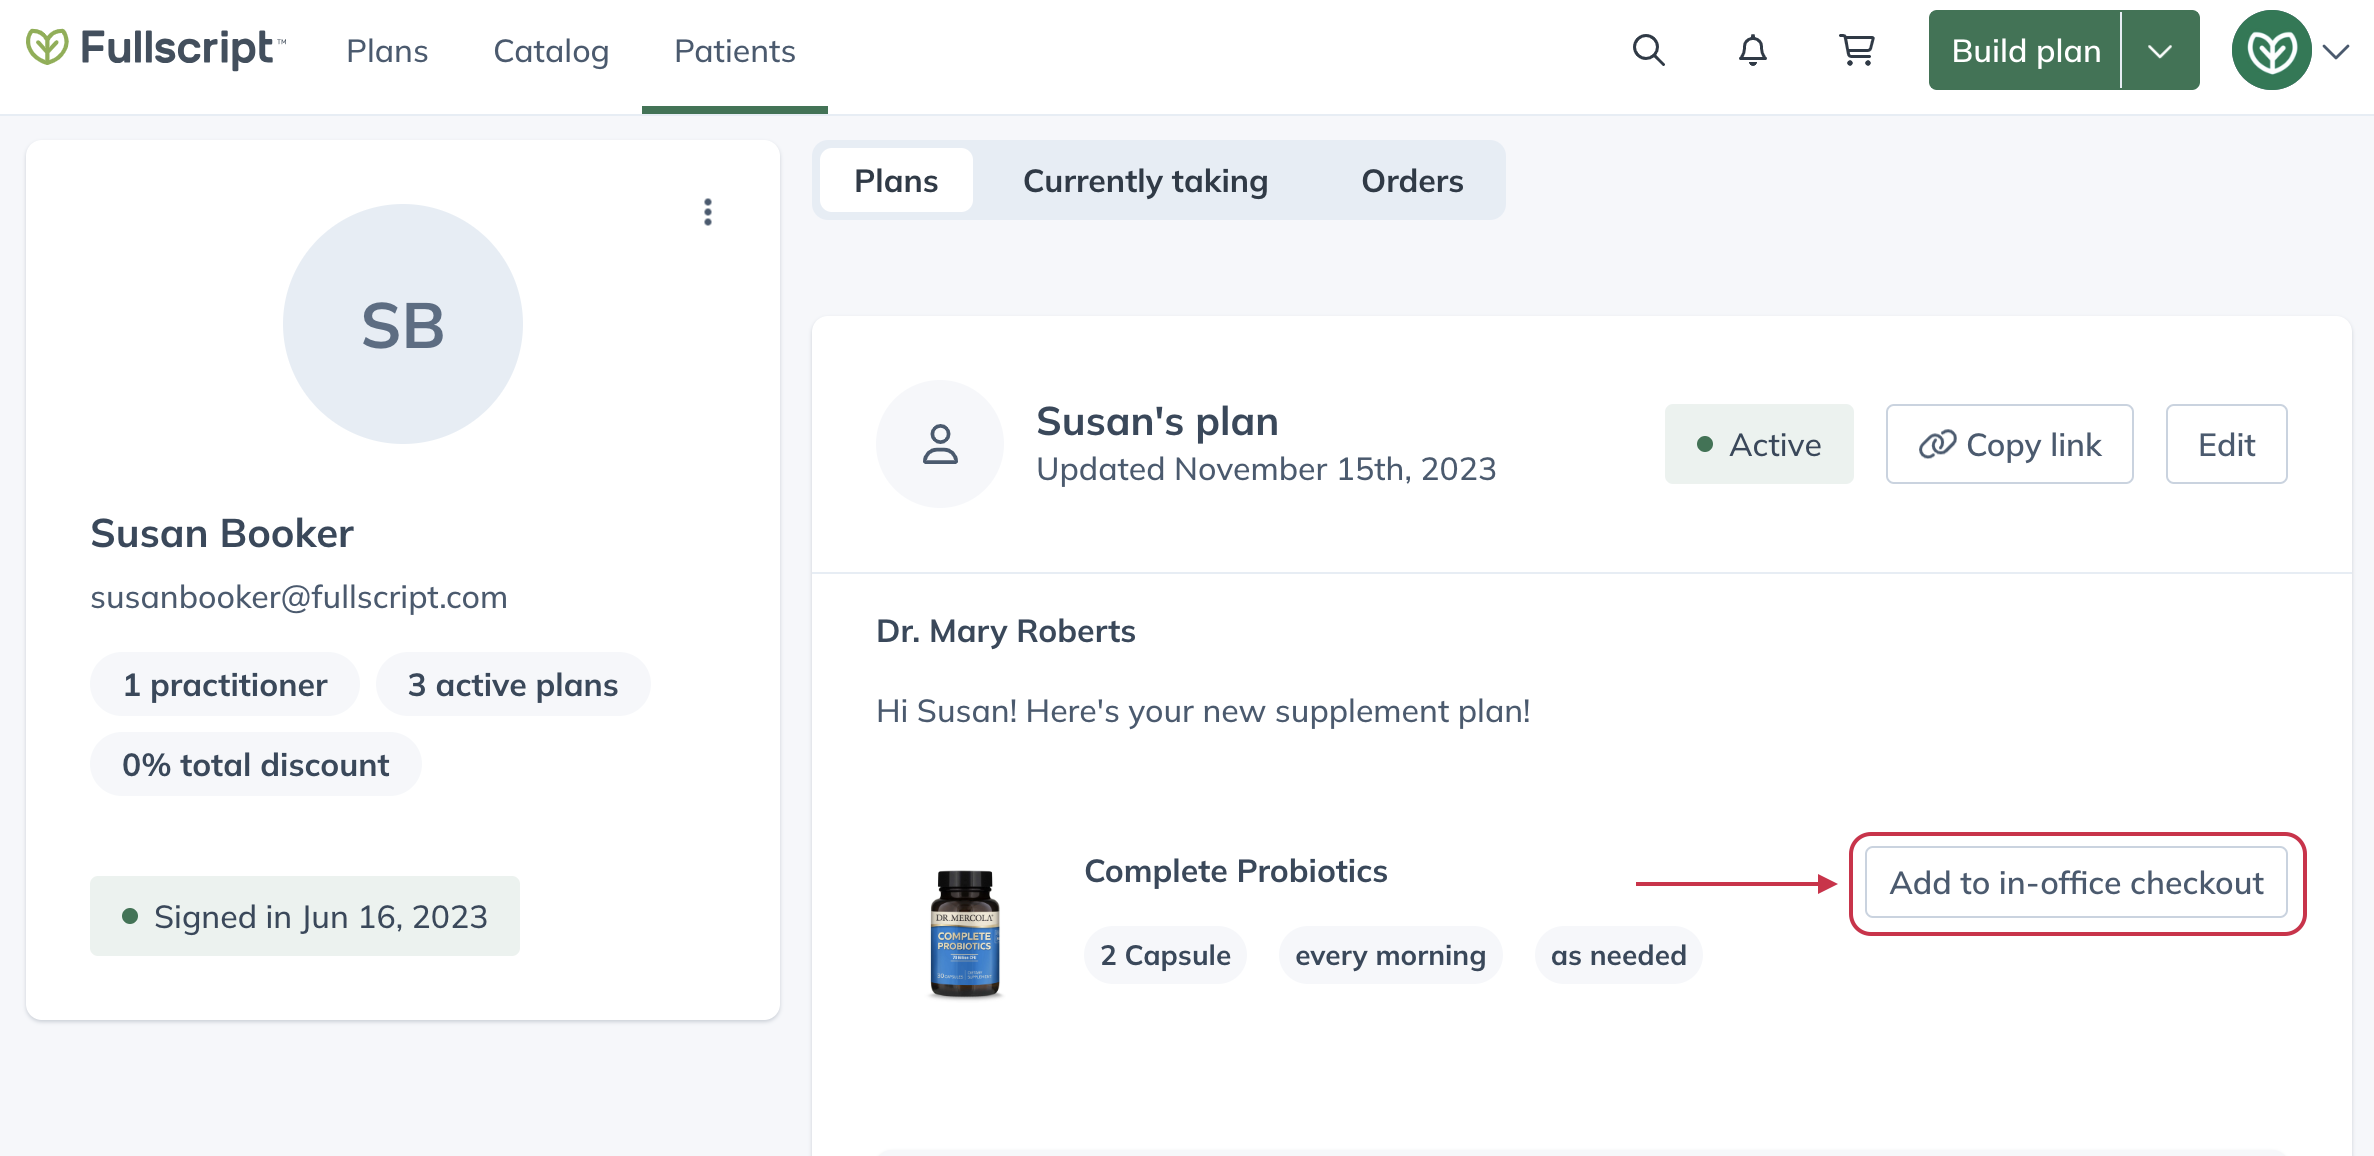 Adding products from a prescription to begin assembling an in-office cart